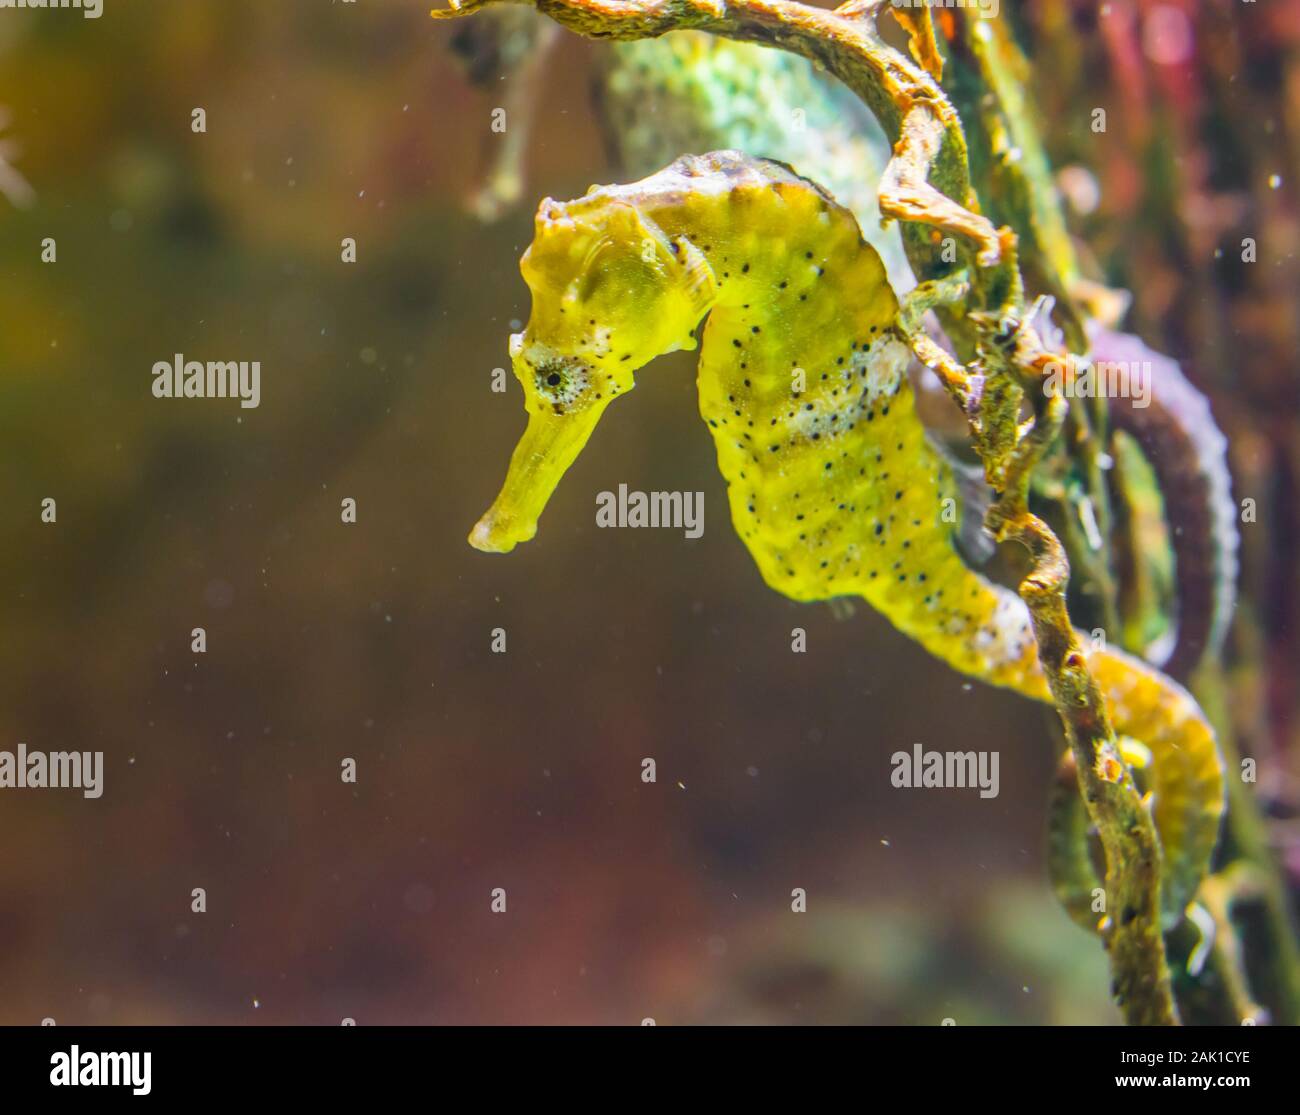 common yellow estuary seahorse with black spots, tropical aquarium pet from the indo-pacific ocean Stock Photo